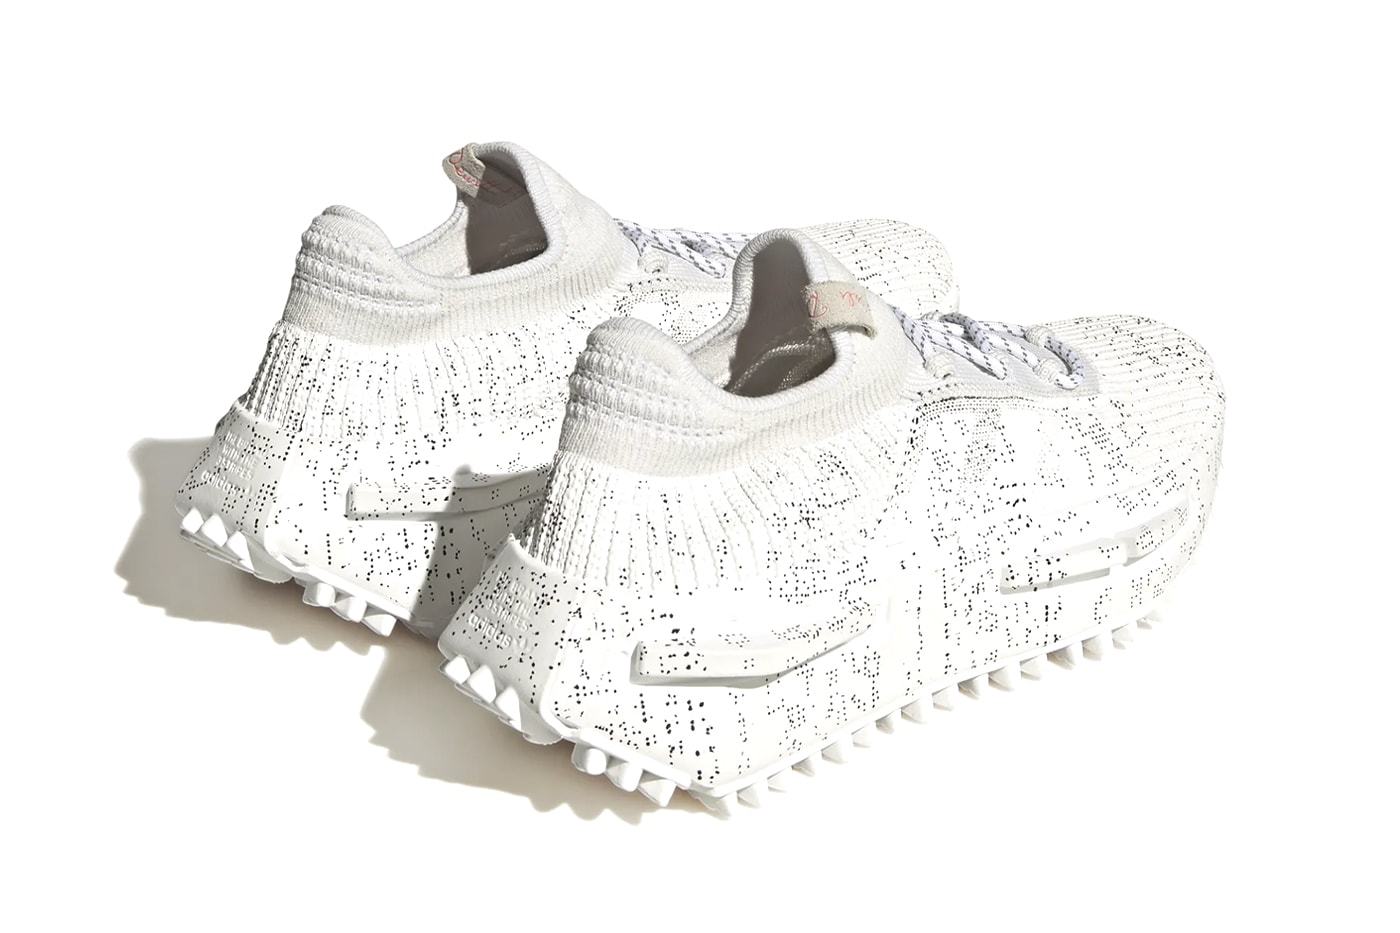 Cali DeWitt adidas NMD S1 Collection black white speckled artist 250 usd release info date price